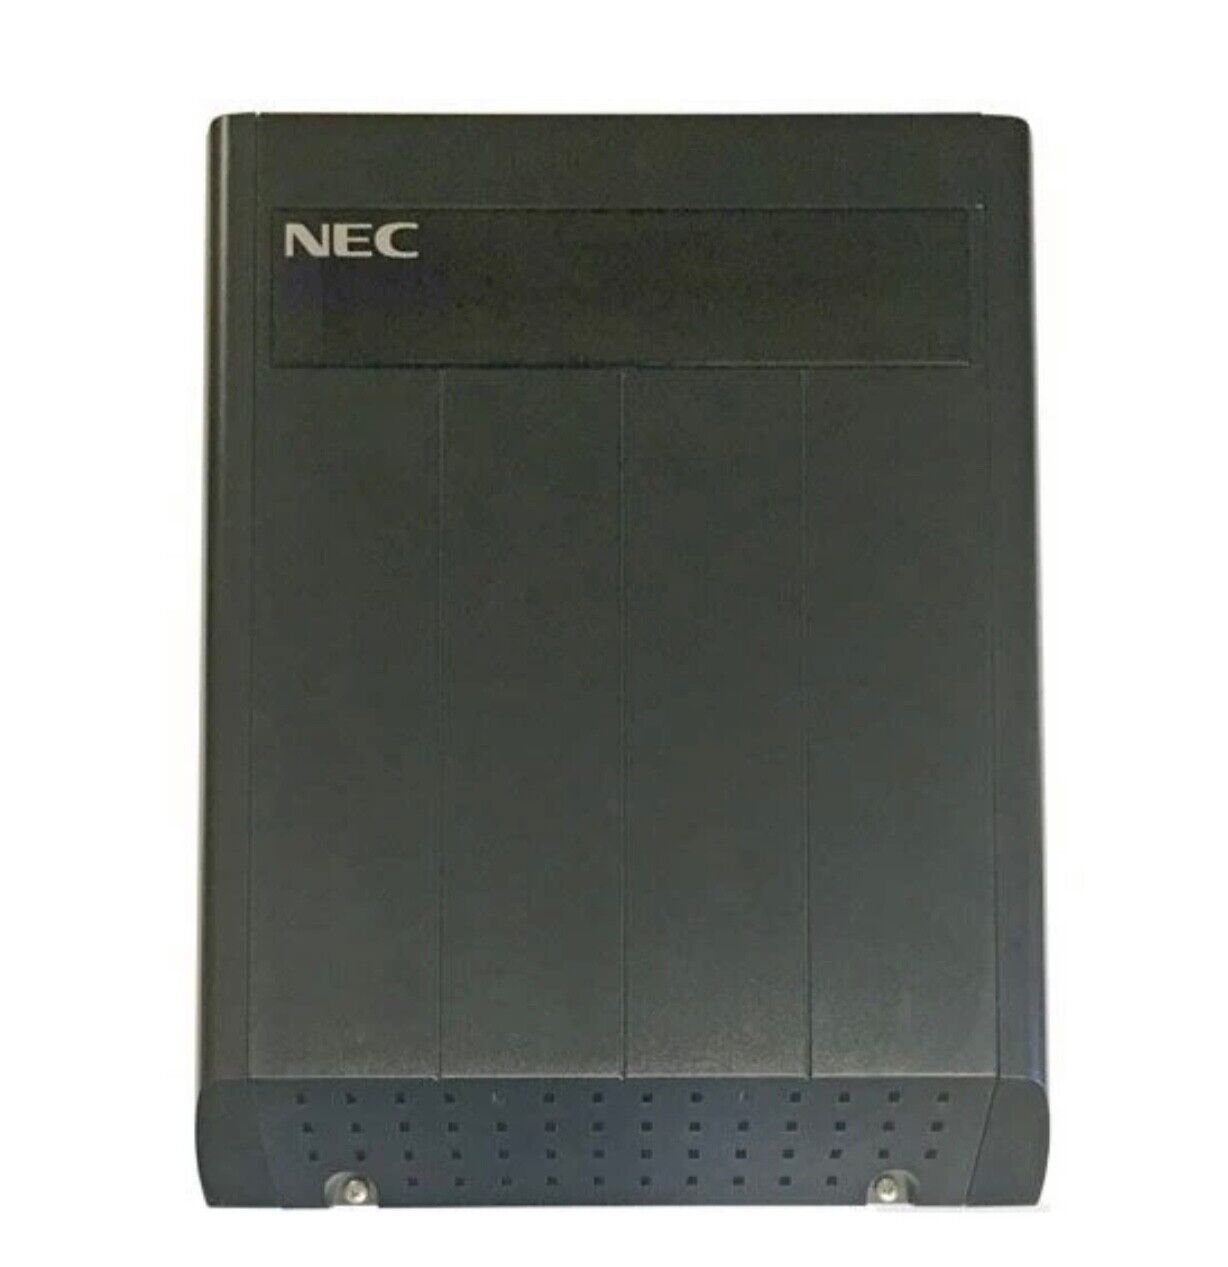 NEC DSX-80 Phone system 8x16